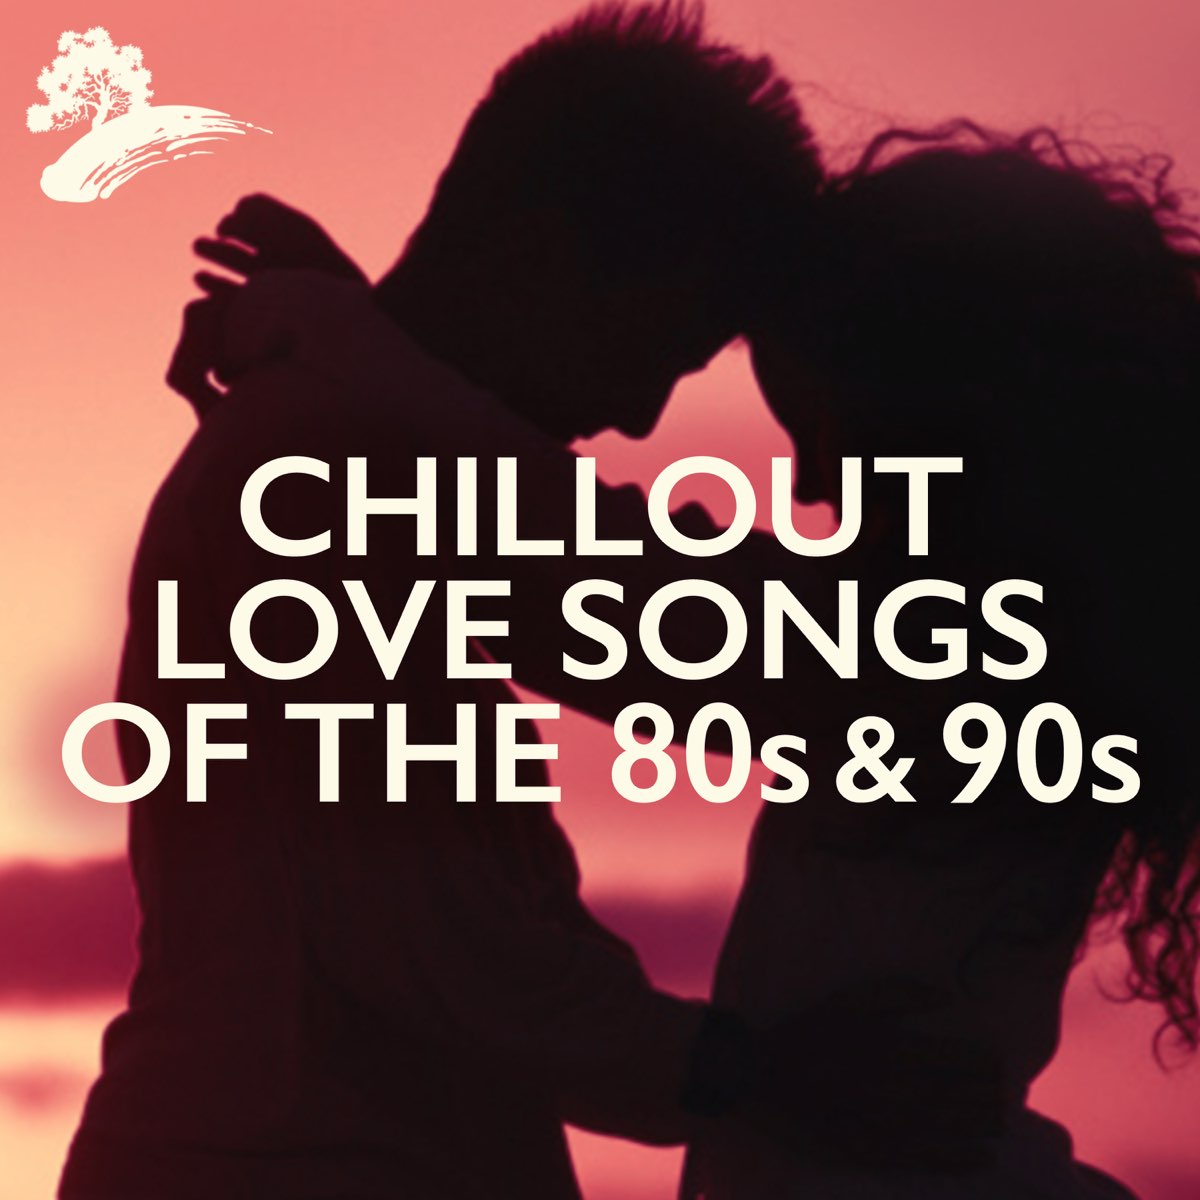 Chilled love. Chillout влюблённые. Insta-Love_Chill__. Schiller - show me the Love (Chillout Remix).